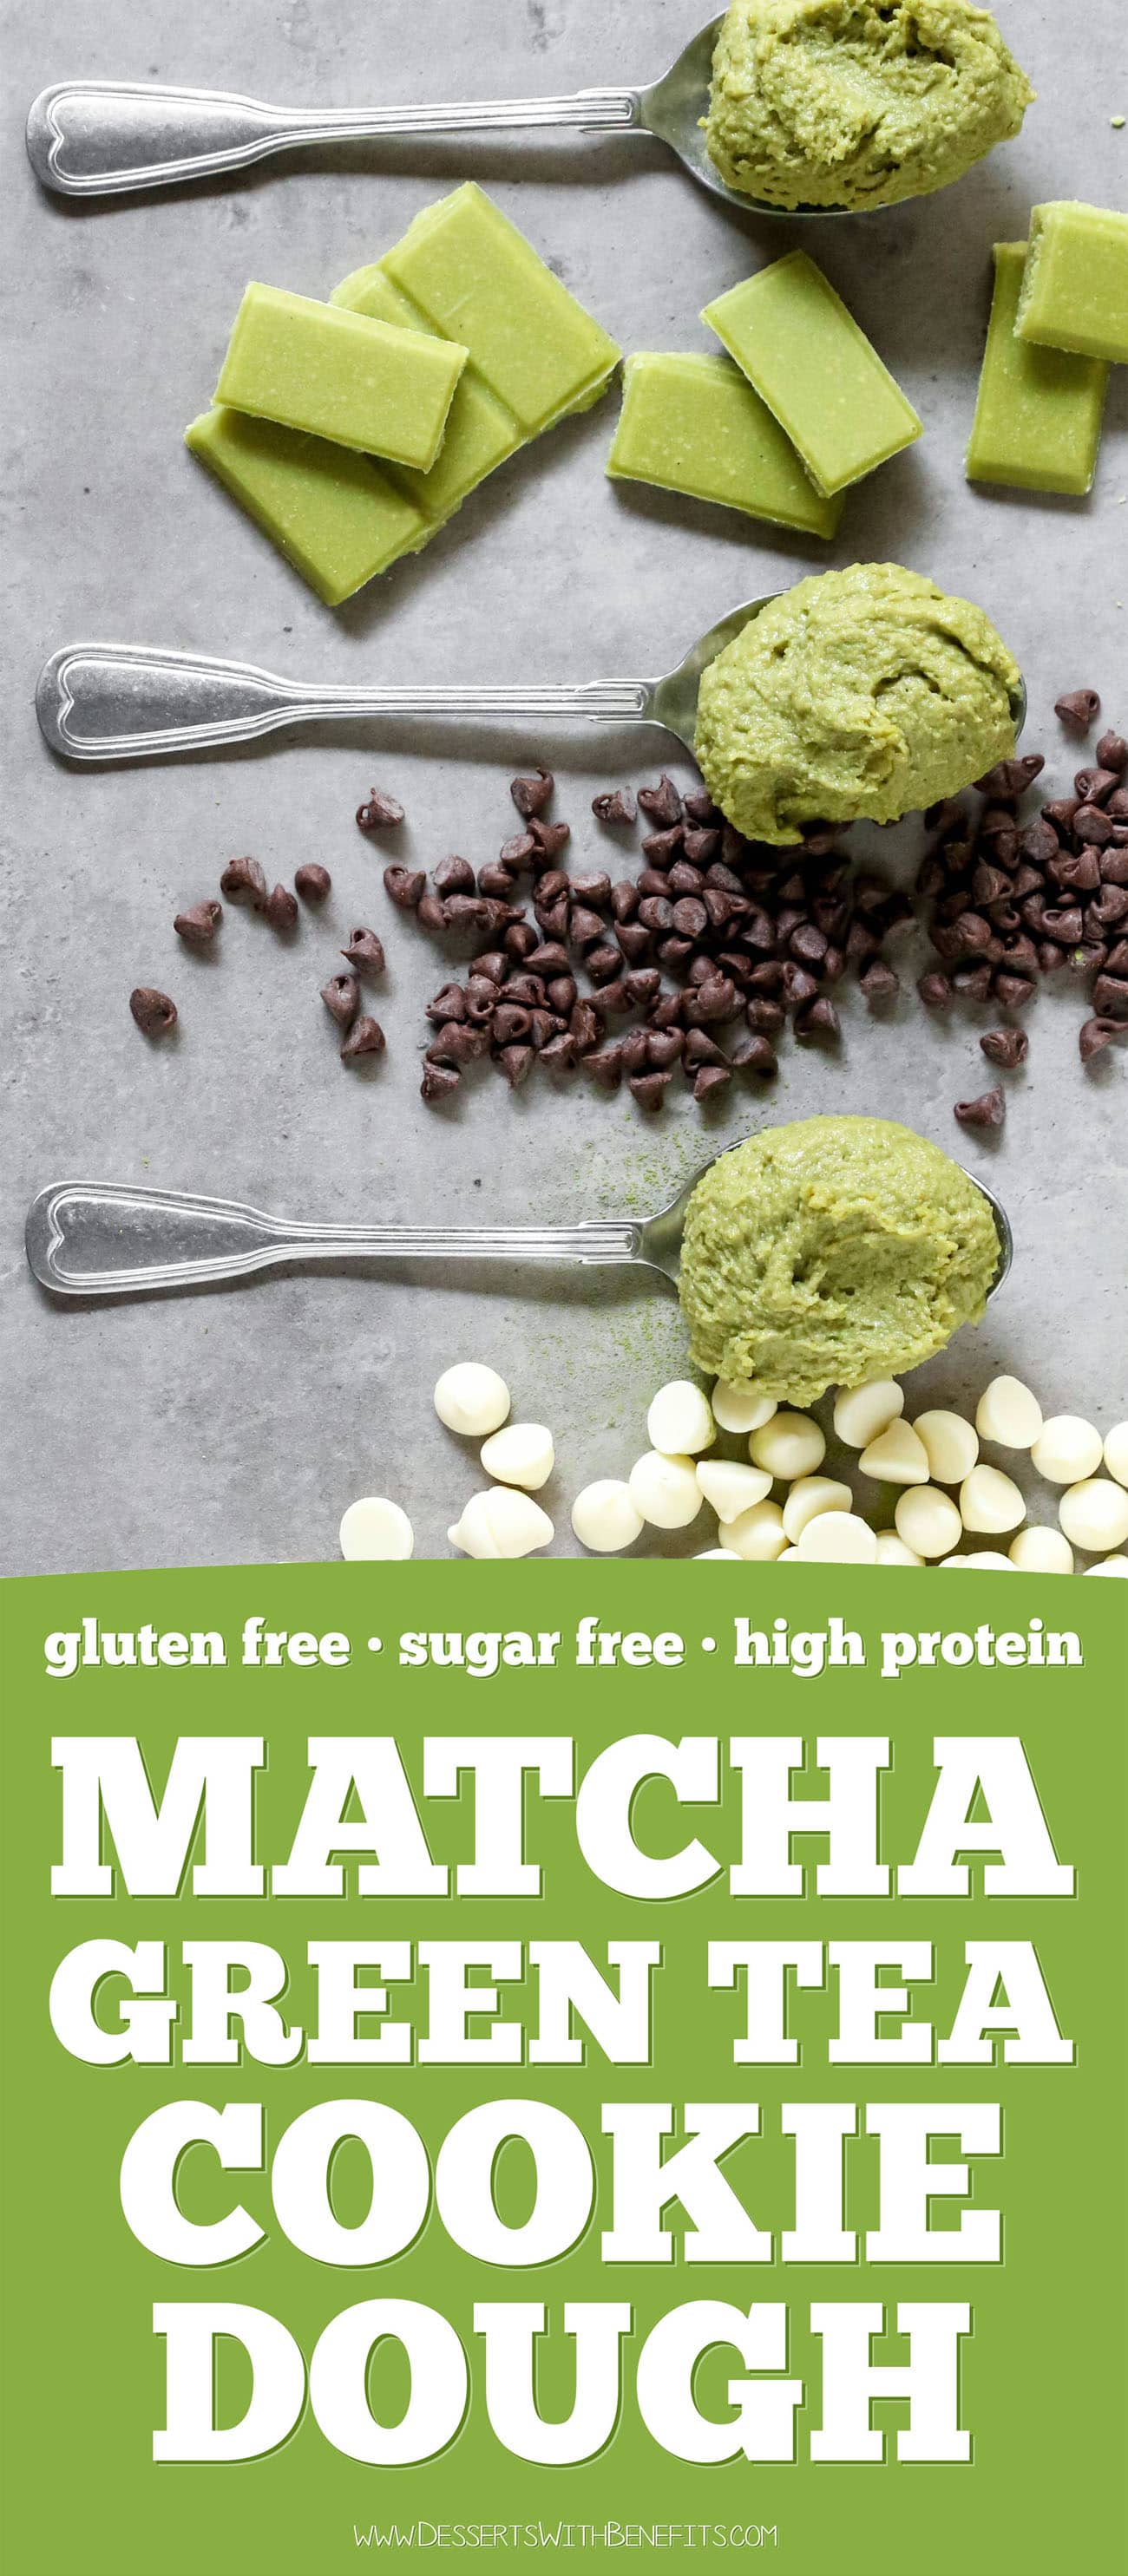 This Matcha Green Tea Cookie Dough is fudgy, sweet, and sinful-tasting, yet it's healthy! Made with nut butter, oats, protein powder (optional), and a secret ingredient. You'd never know this is sugar free, gluten free, high protein, and high fiber too!